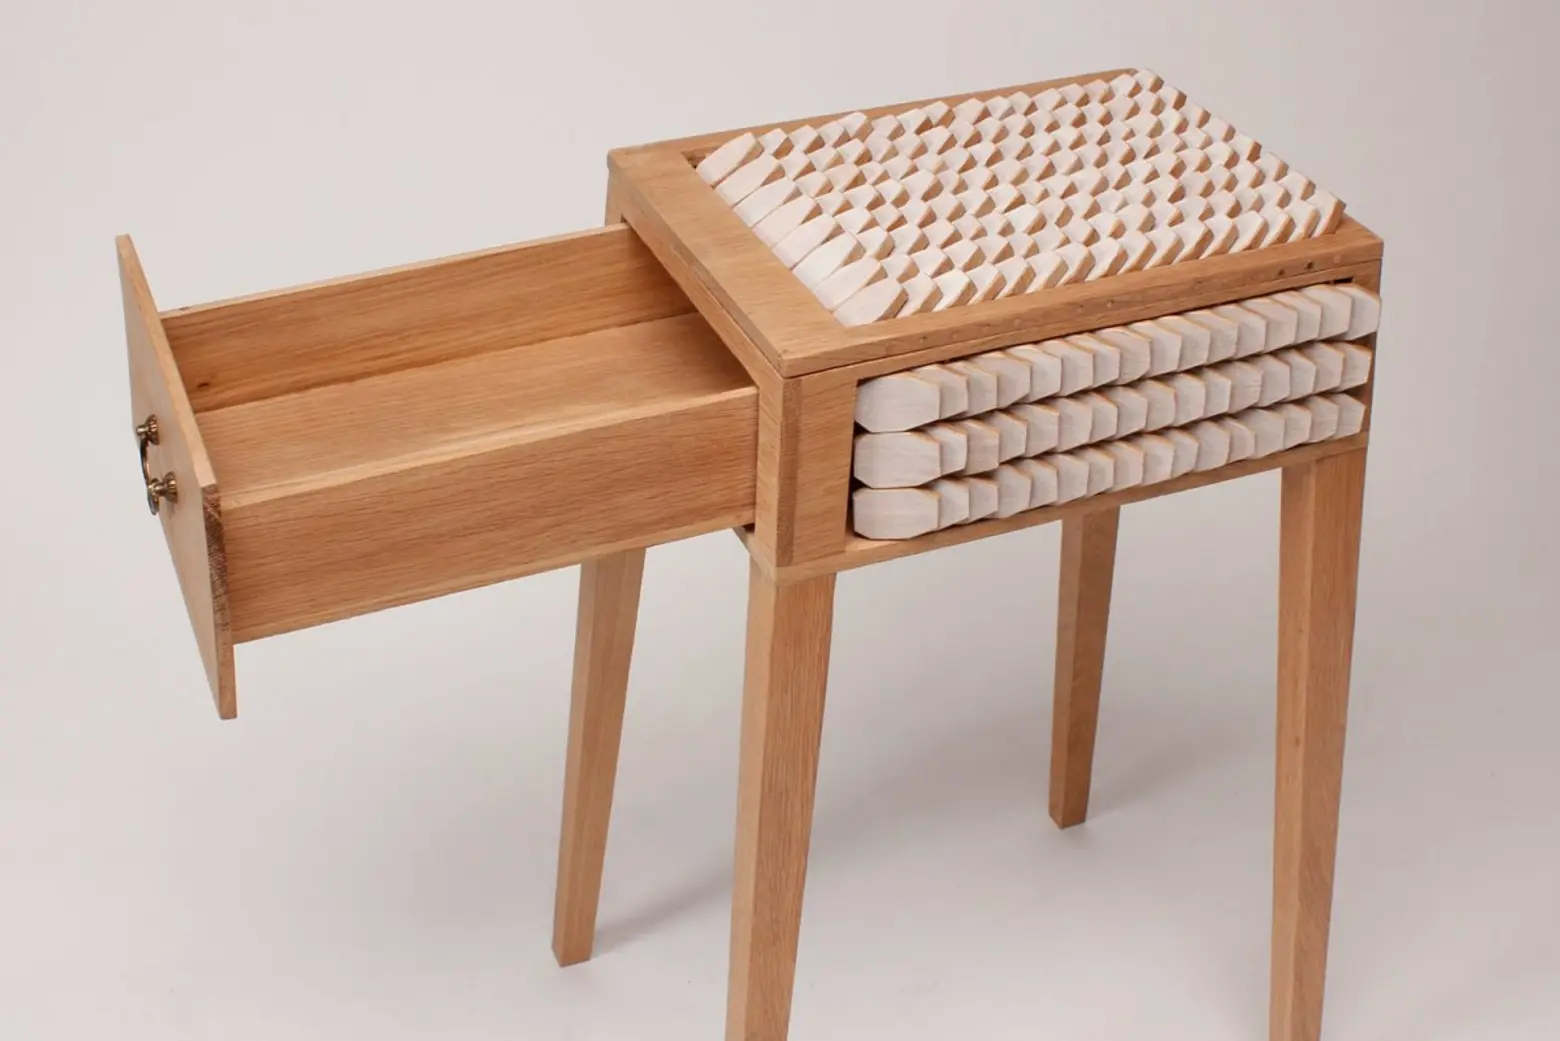 Juno Jeon, responsive design, Pull me to life, the Netherlands, Korean designer, humorous objects, alive furniture, responsive design, wooden scales